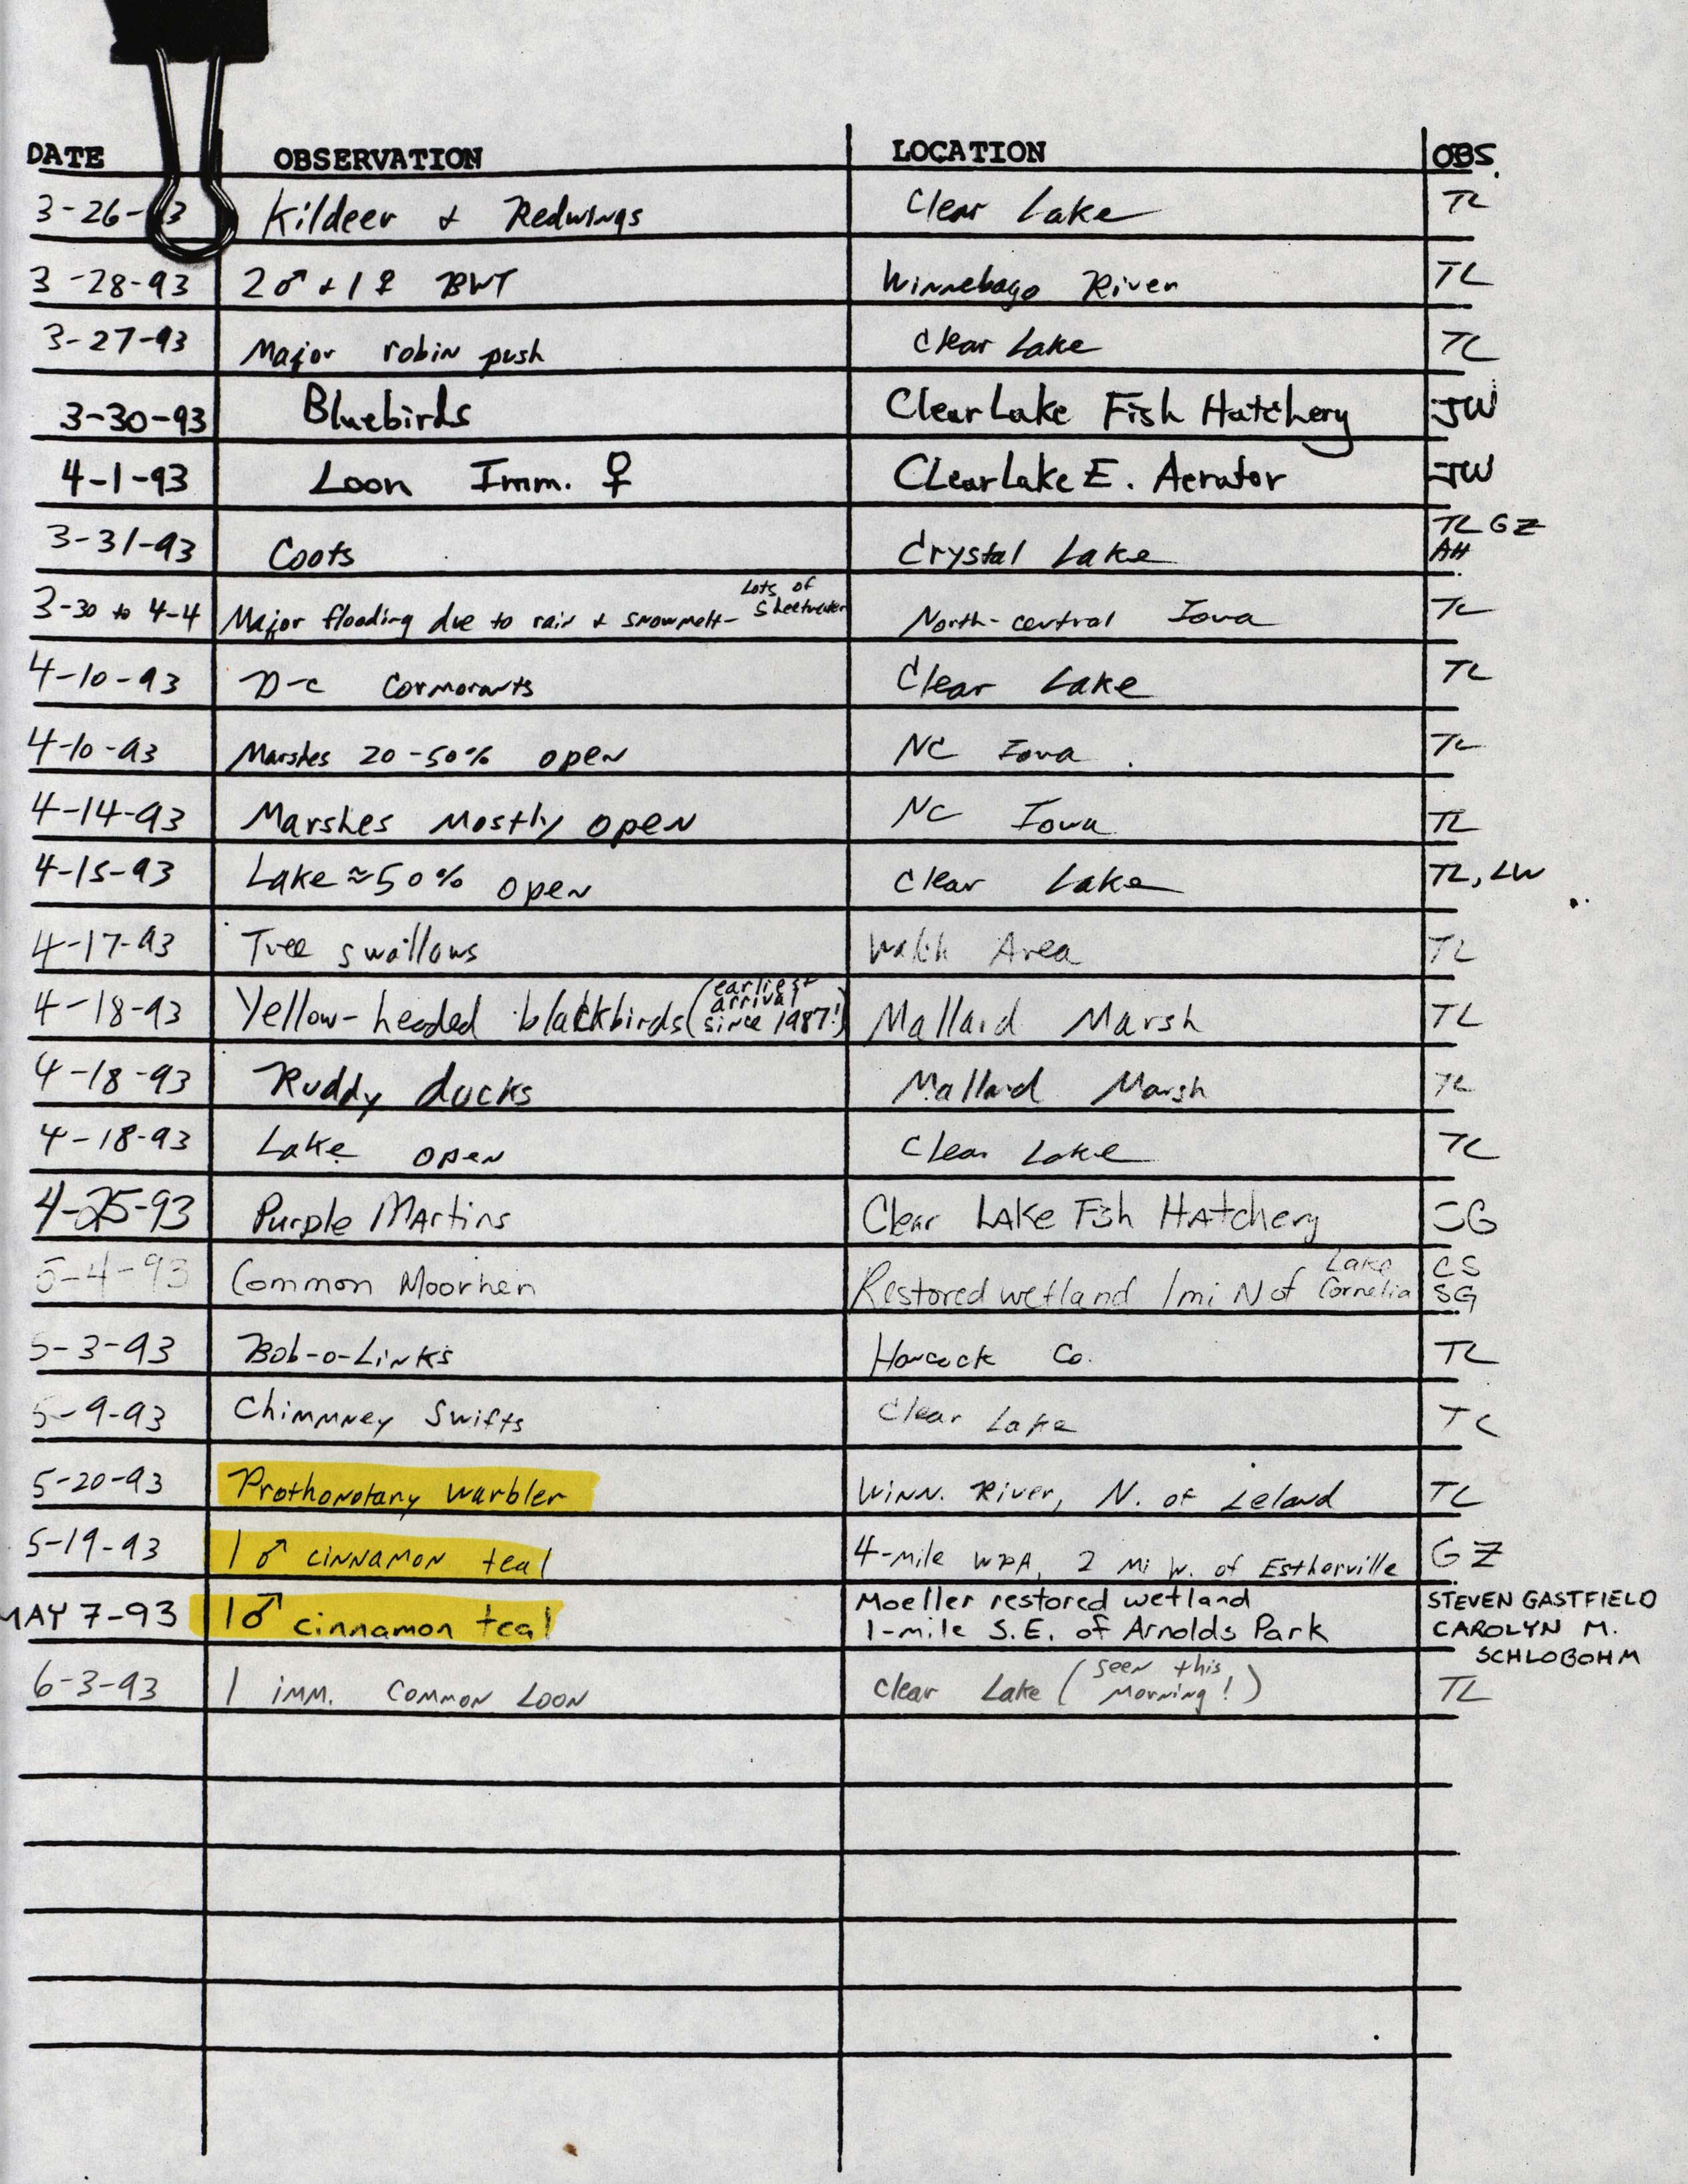 Field notes contributed by multiple observers, spring 1993